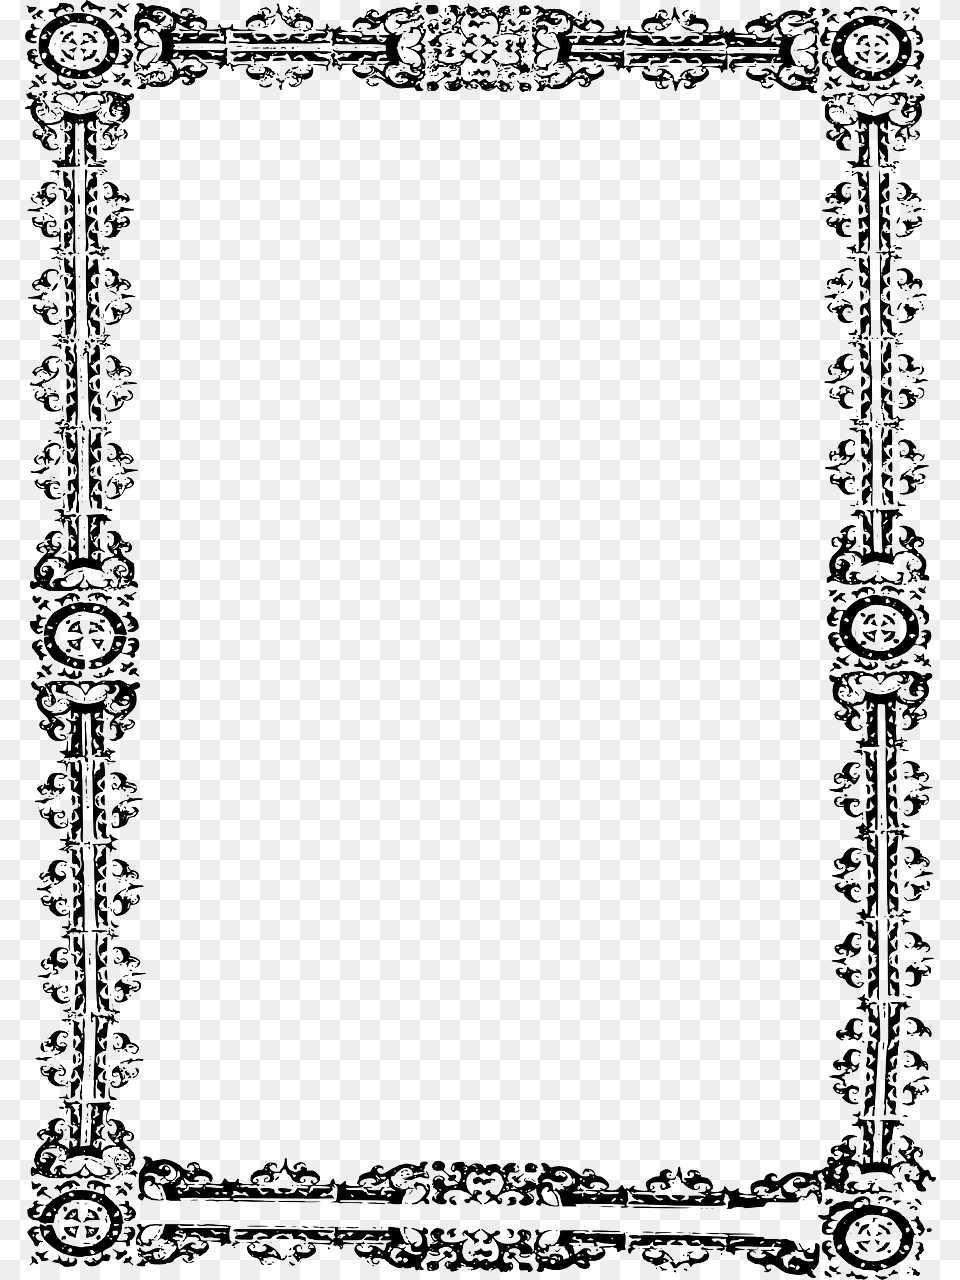 Page Borders Flowers Black And White, Home Decor, Gate, Art, Floral Design Png